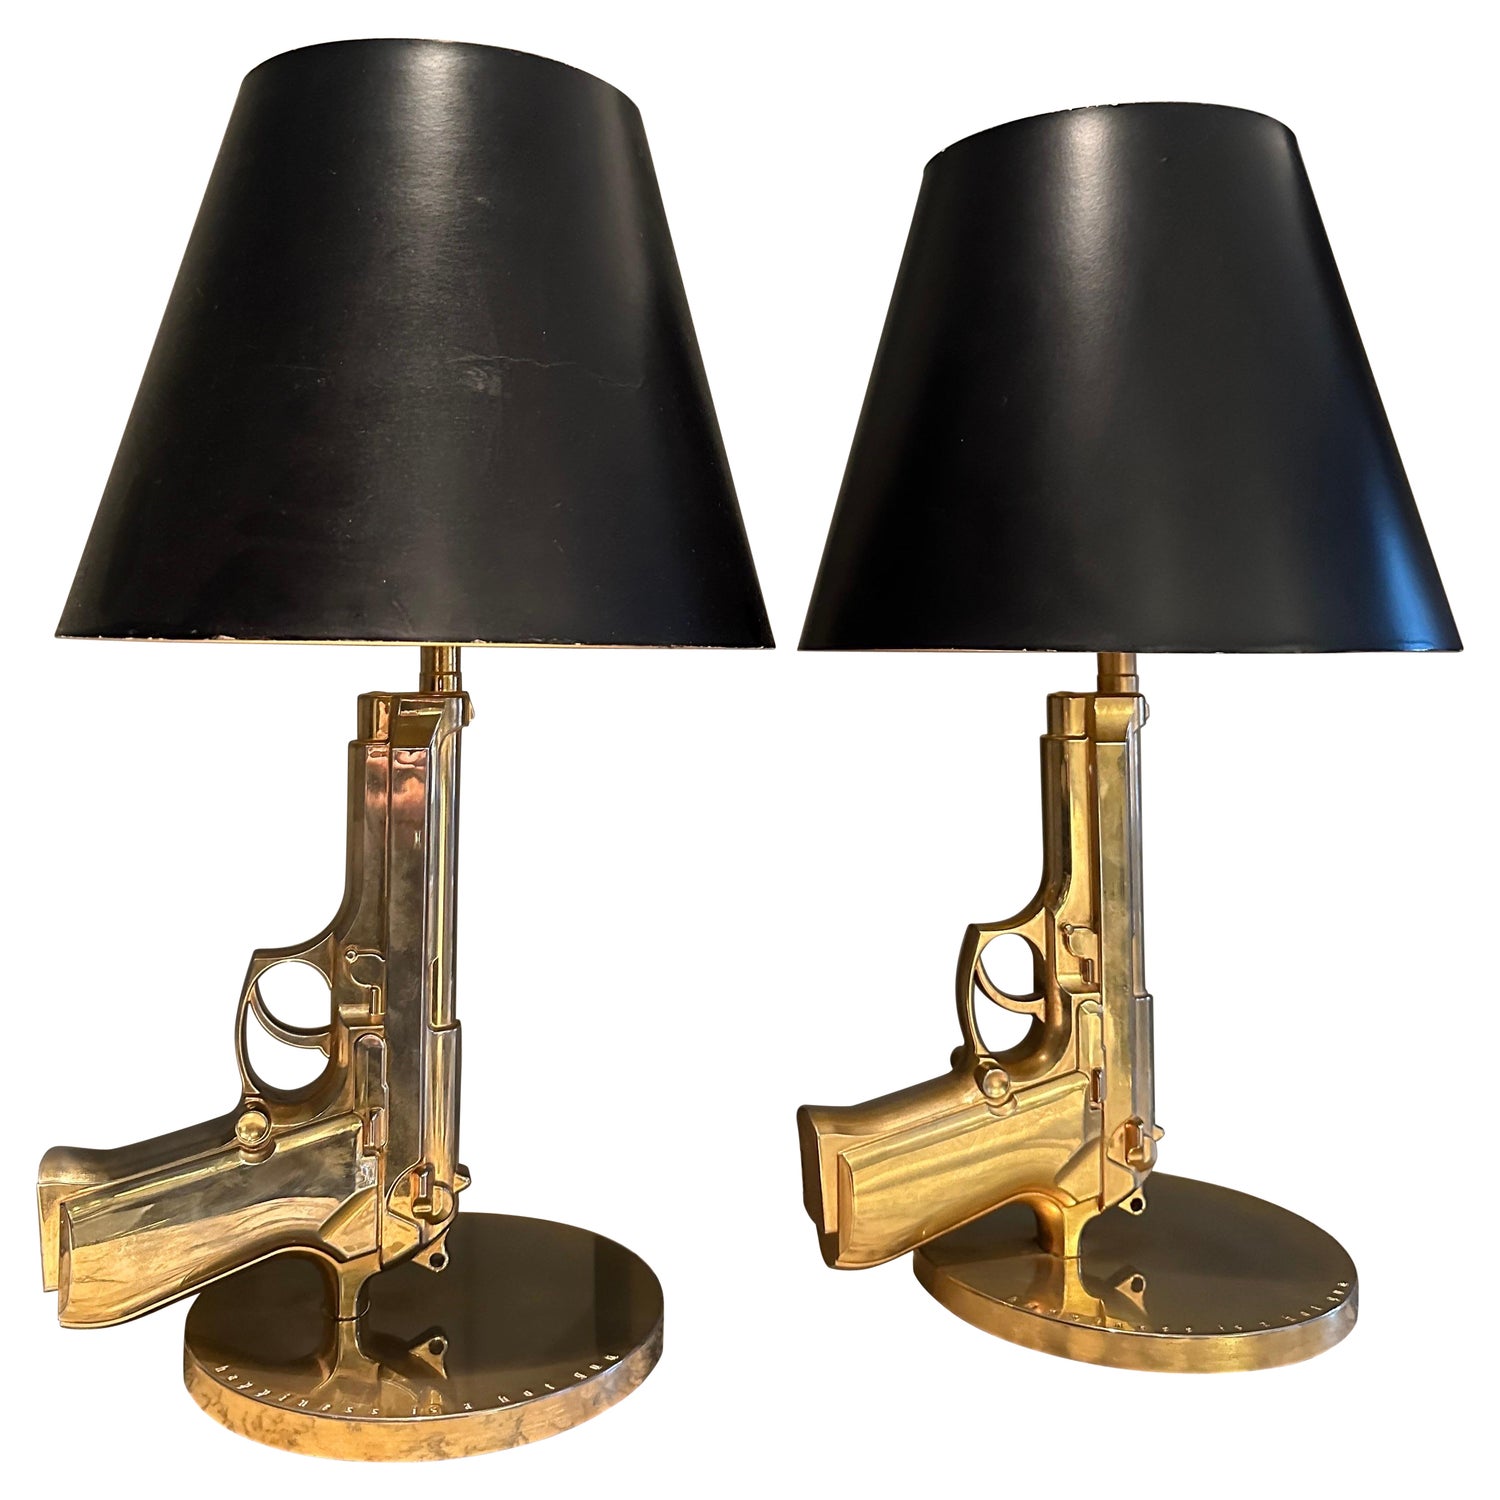 FLOS Guns Collection AK47 Table Lamp in Gold by Philippe Starck For Sale at  1stDibs | ak47 lamp, ak47 gold lamp, philippe starck ak47 lamp